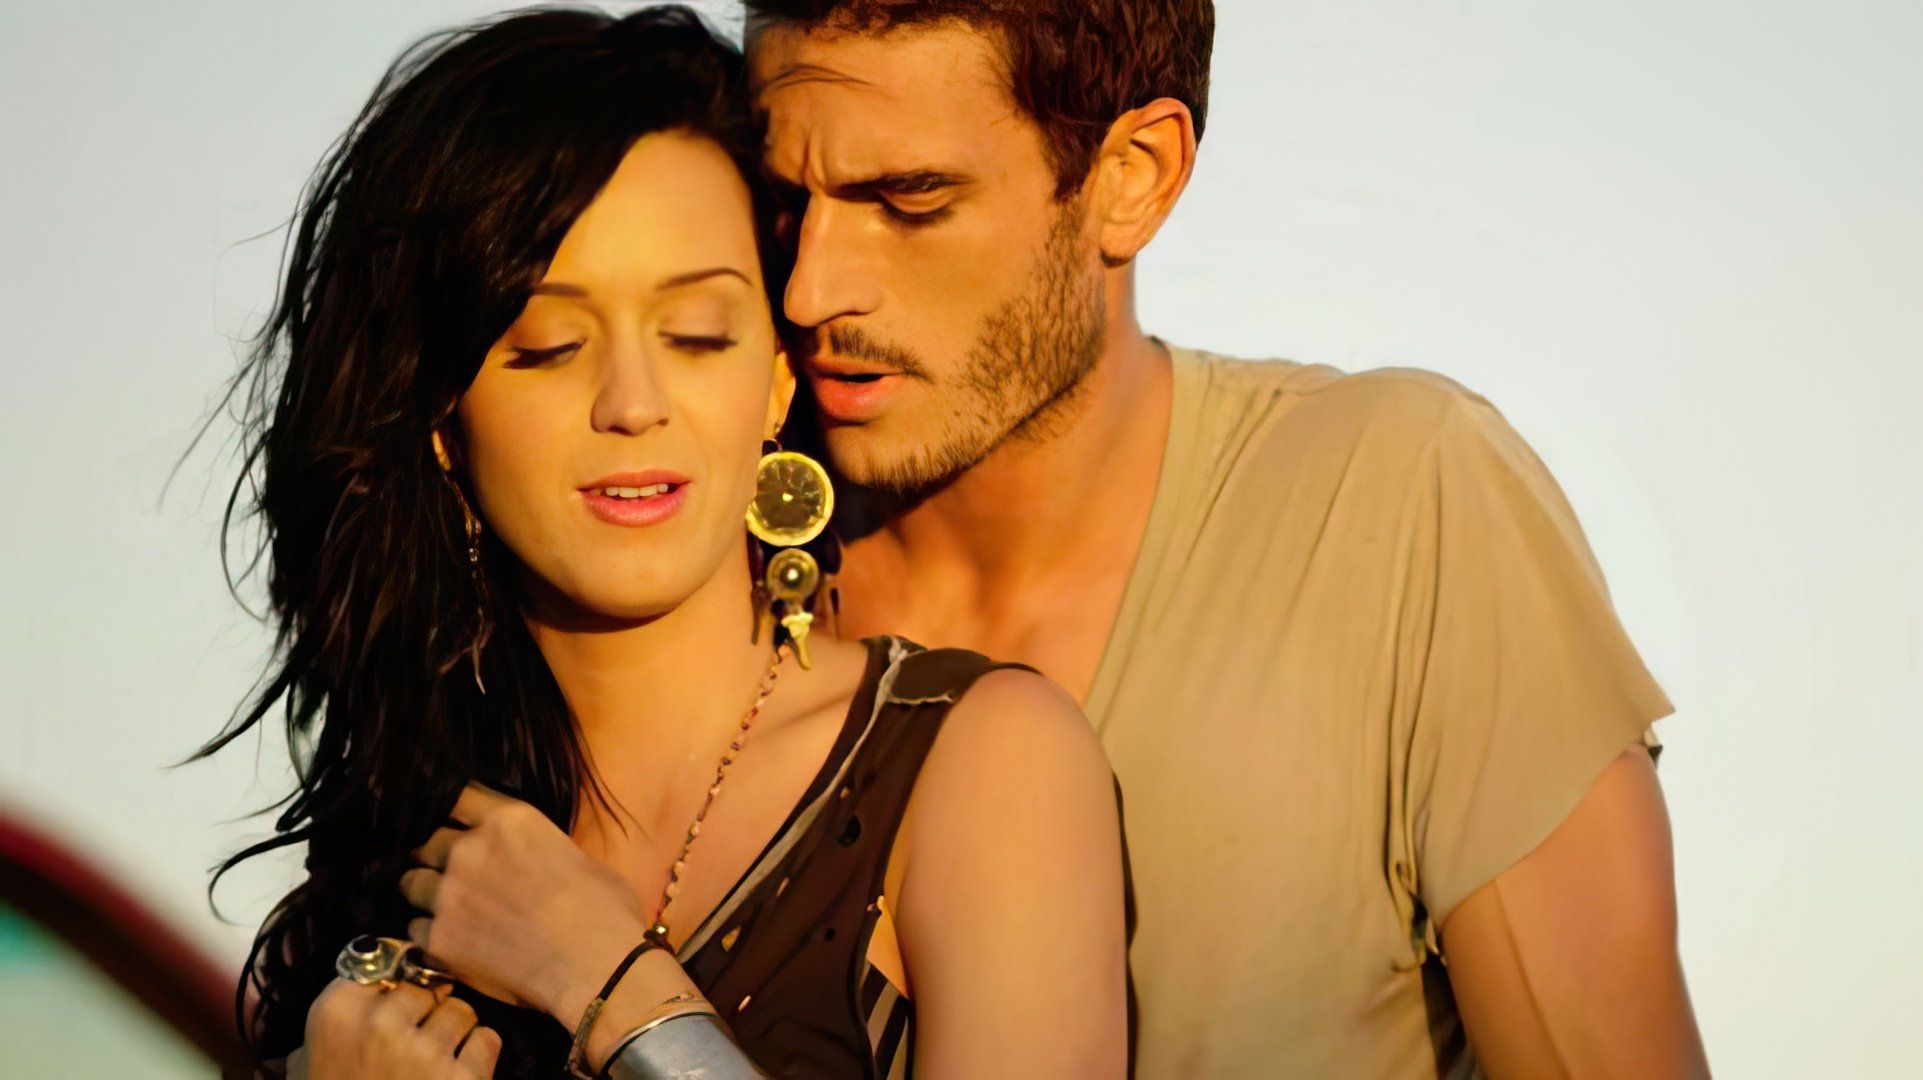 Katy Perry and Josh Kloss in the 'Teenage Dream' video